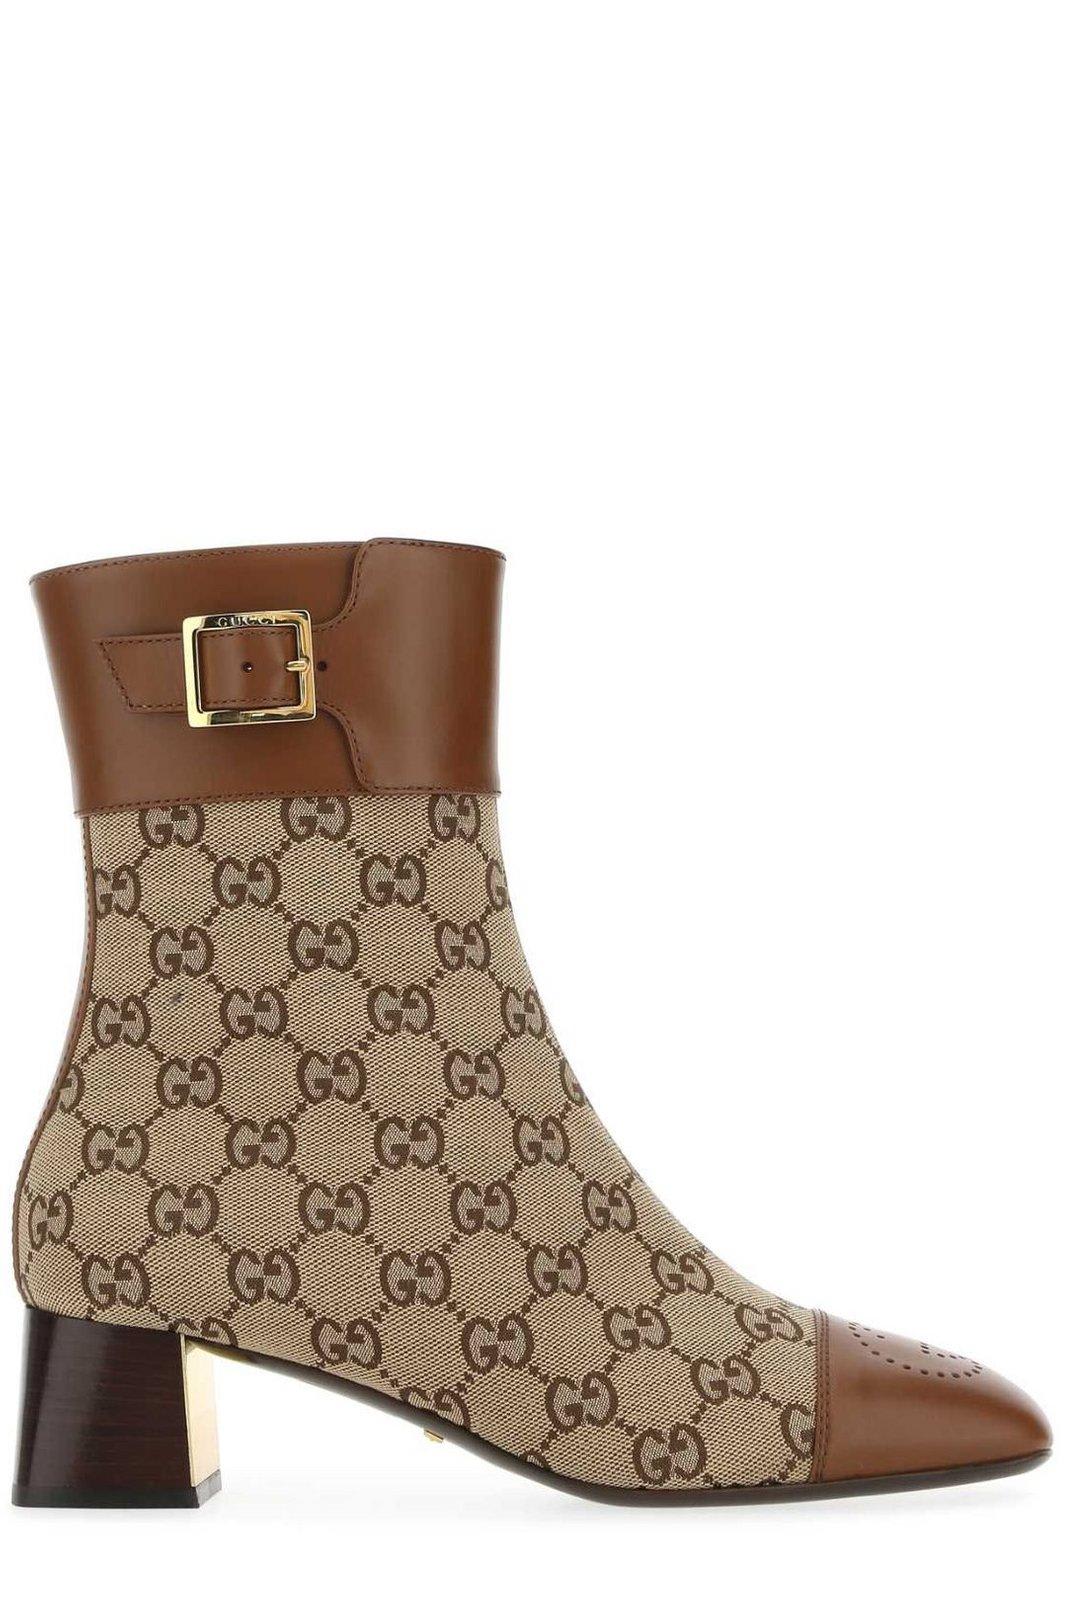 GUCCI GG SQUARED-TOE BUCKLED ANKLE BOOTS